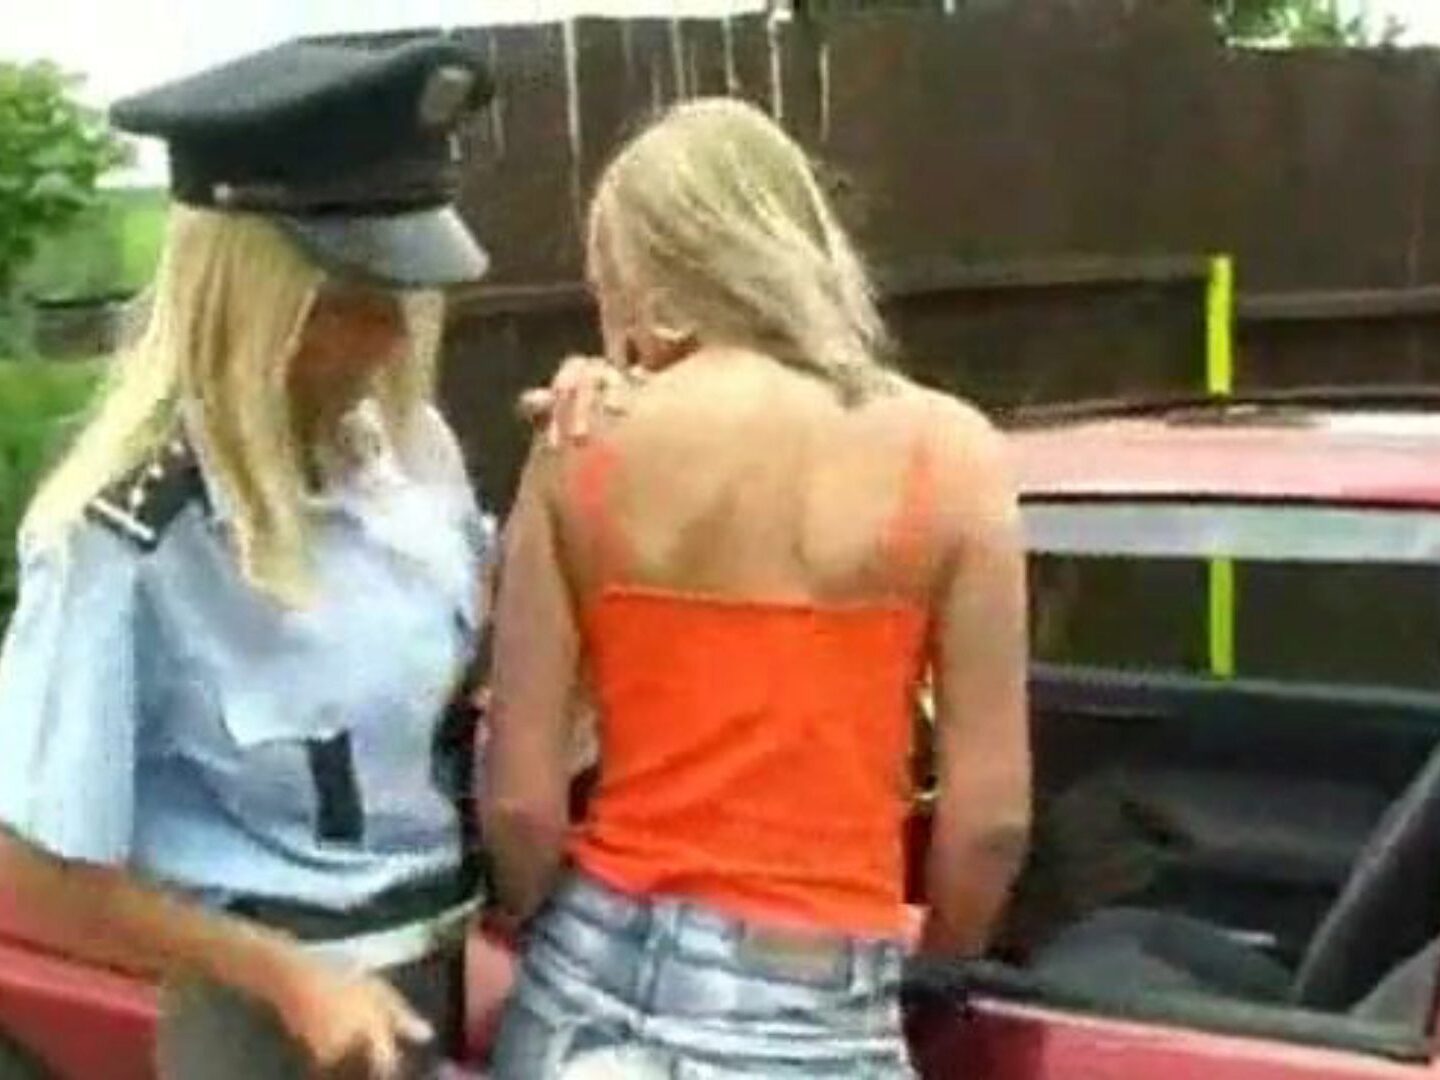 Sexhd Police India Video - Xxx Video Police Sex Video India Police Officer S - XXX BULE